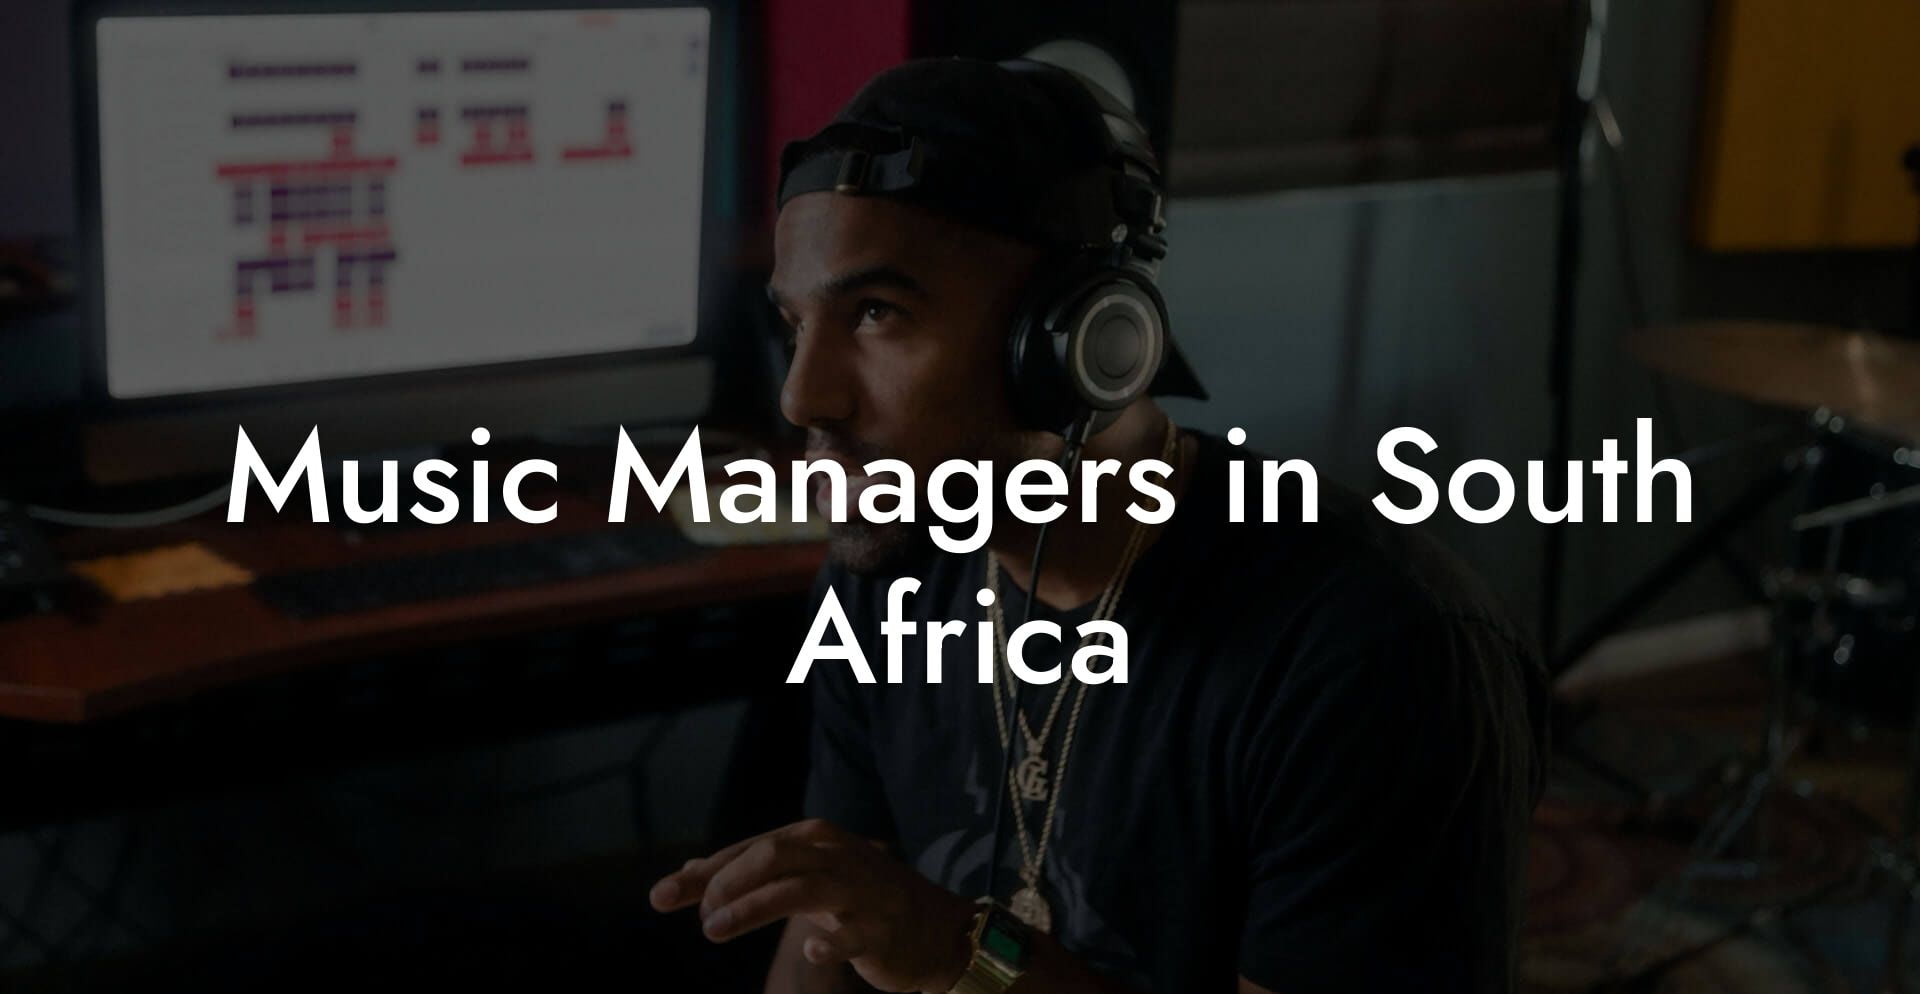 Music Managers in South Africa